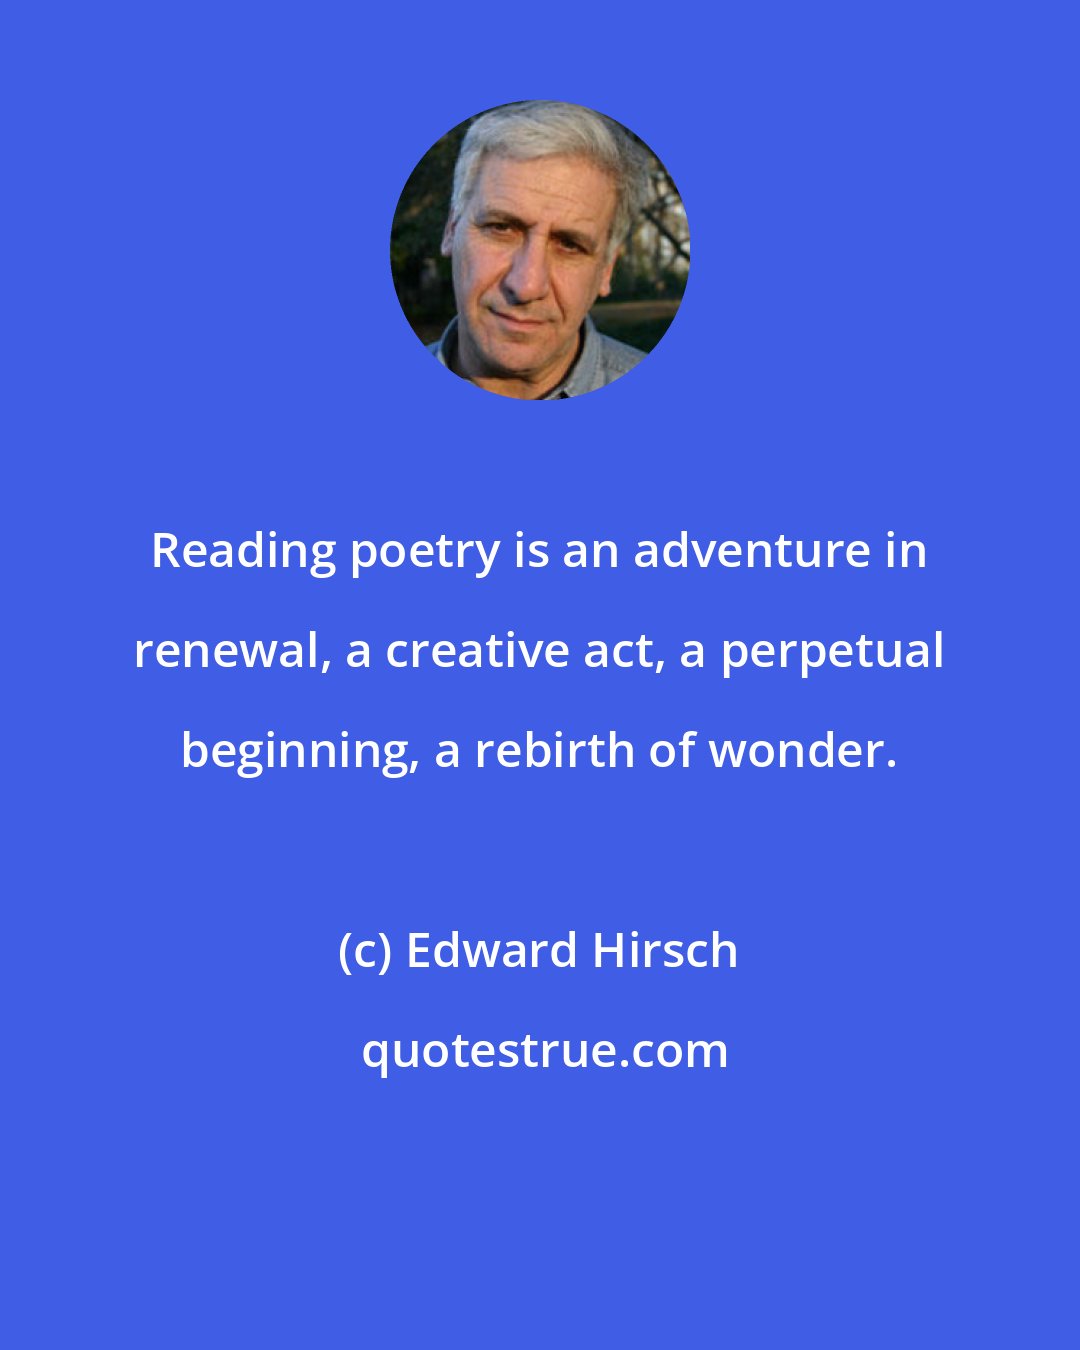 Edward Hirsch: Reading poetry is an adventure in renewal, a creative act, a perpetual beginning, a rebirth of wonder.